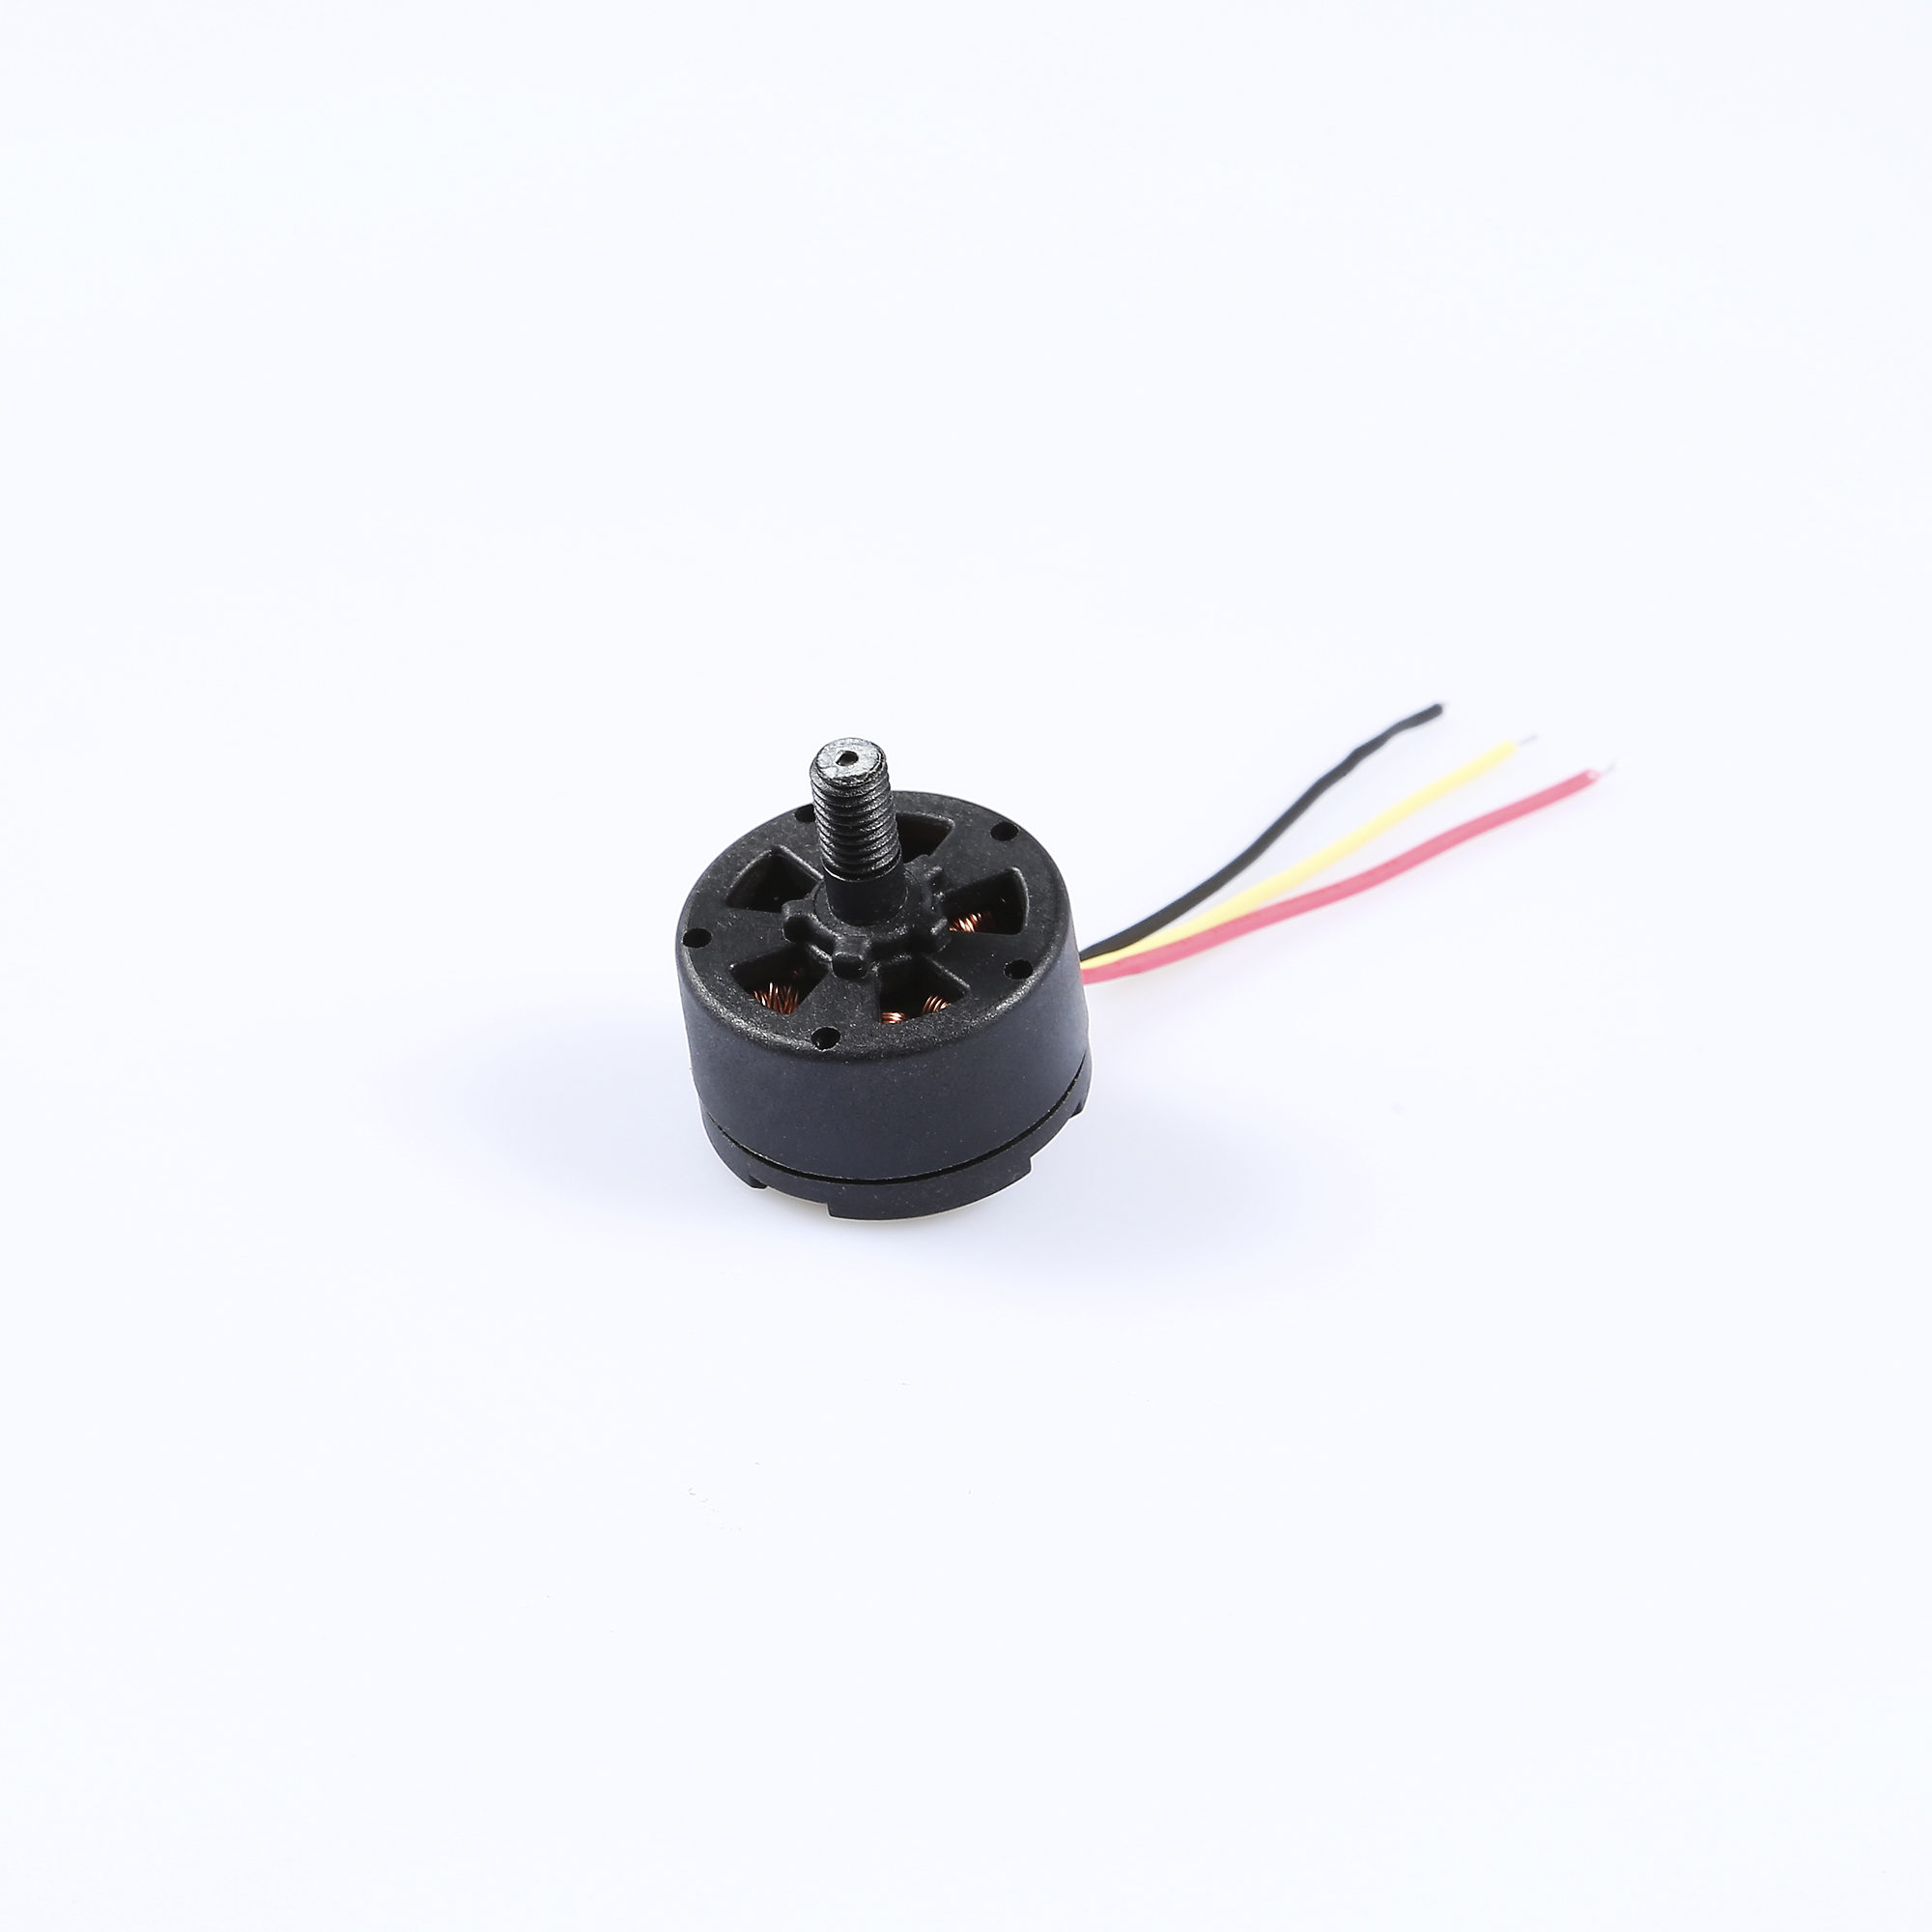 Spare Parts for Quadcopter H501S S Hubsan X4 H501S-32 Motor A 1 1 & Motor B 